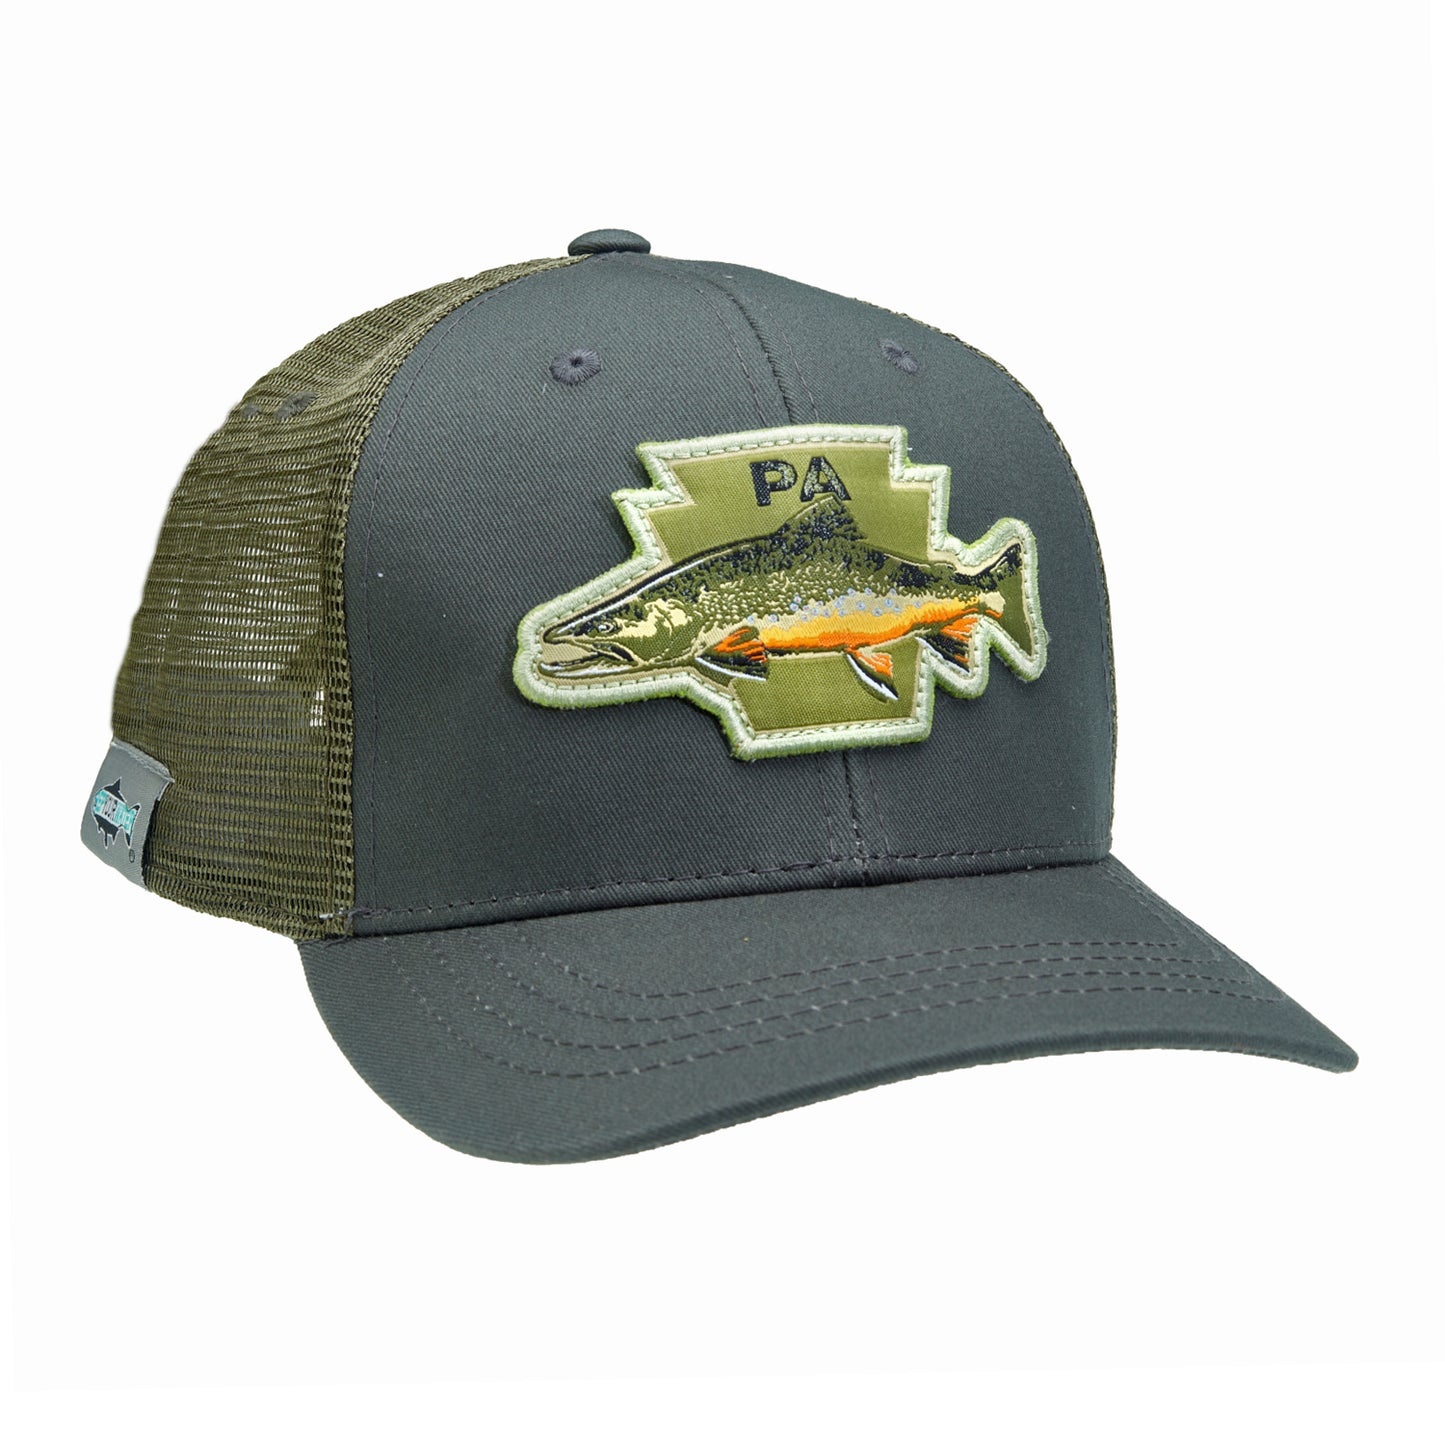 A hat with green mesh in the back and green fabric in front has a patch featuring a brook trout on top of a keystone shape and the letters PA